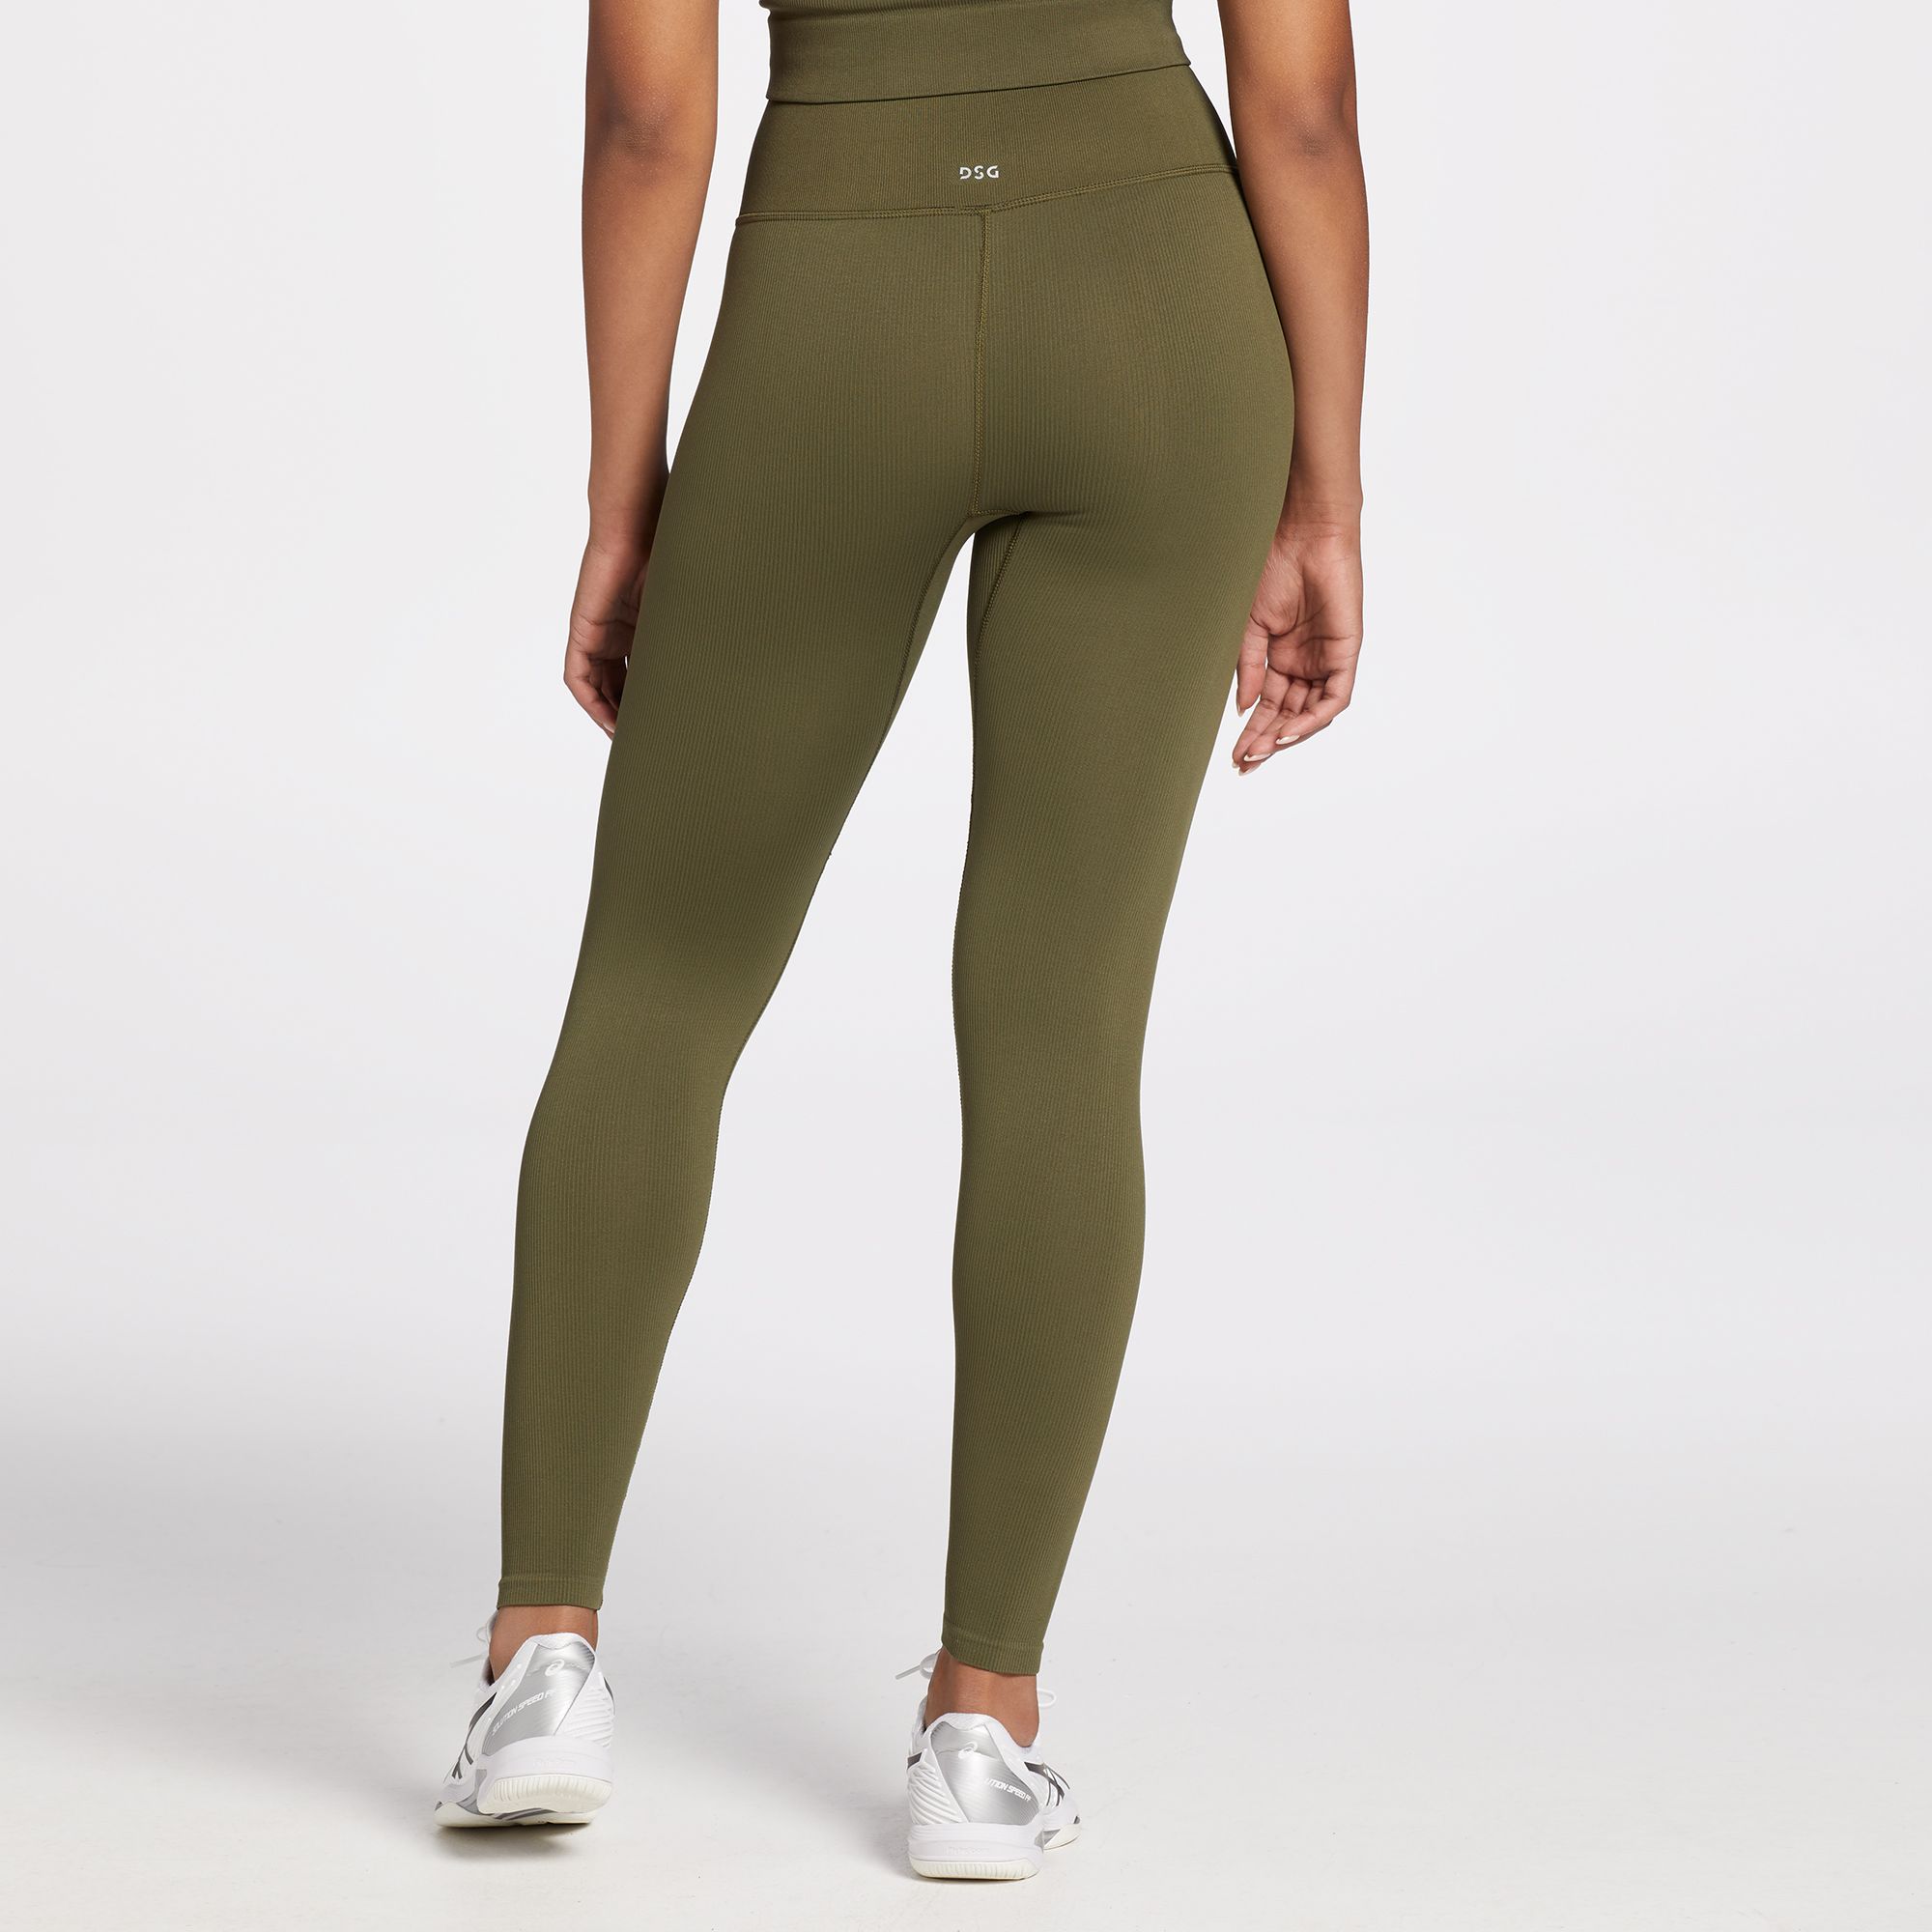 DICK'S Sporting Goods DSG Leggings Gray Size XS - $11 (78% Off Retail) -  From Makayla